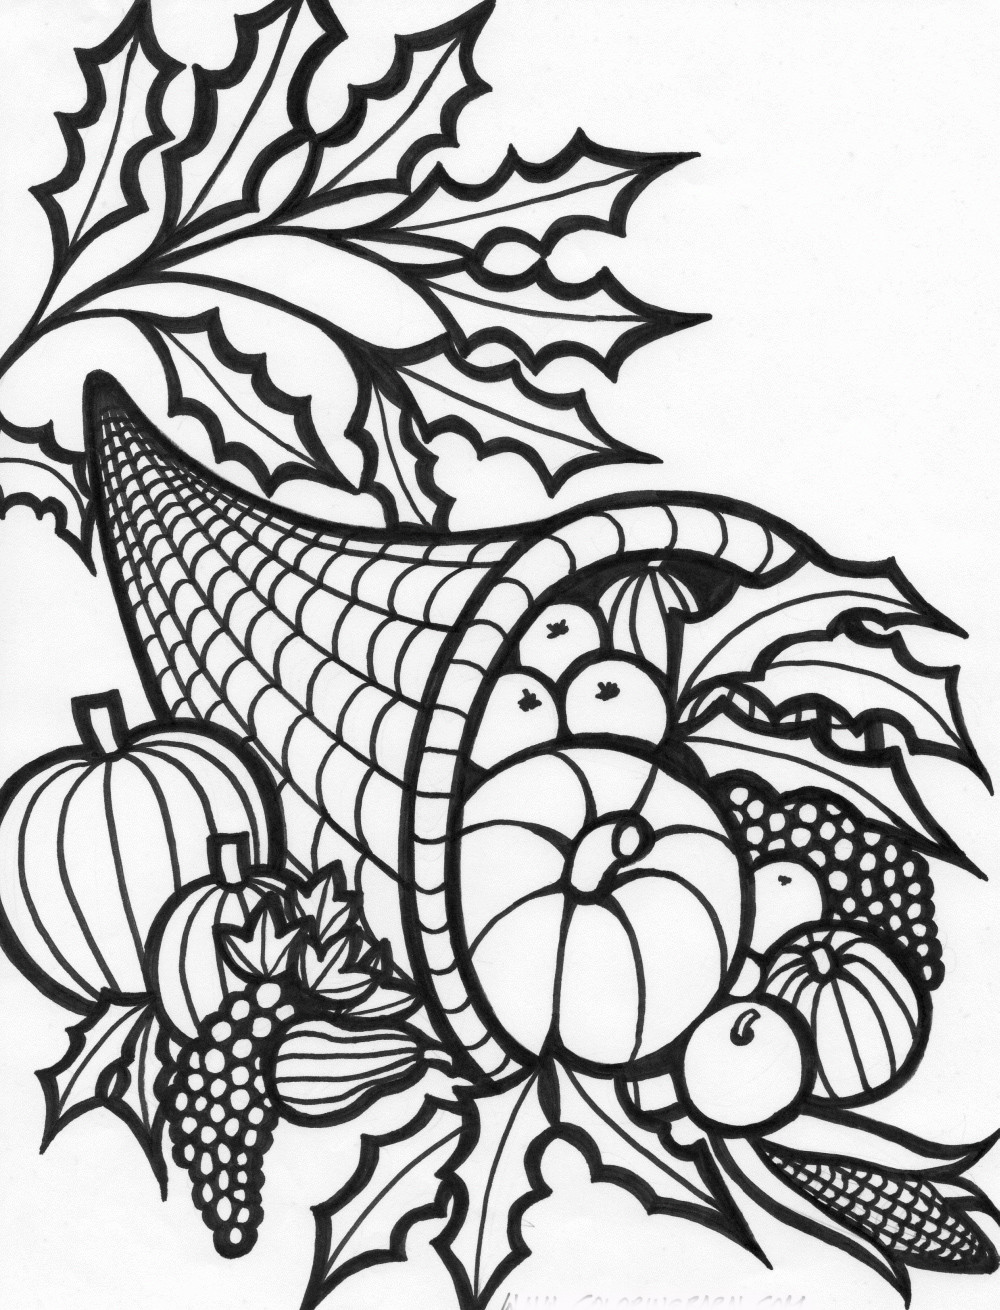 Thanksgiving Adult Coloring Pages
 Free Coloring Pages Thanksgiving Cornucopia Coloring Pages